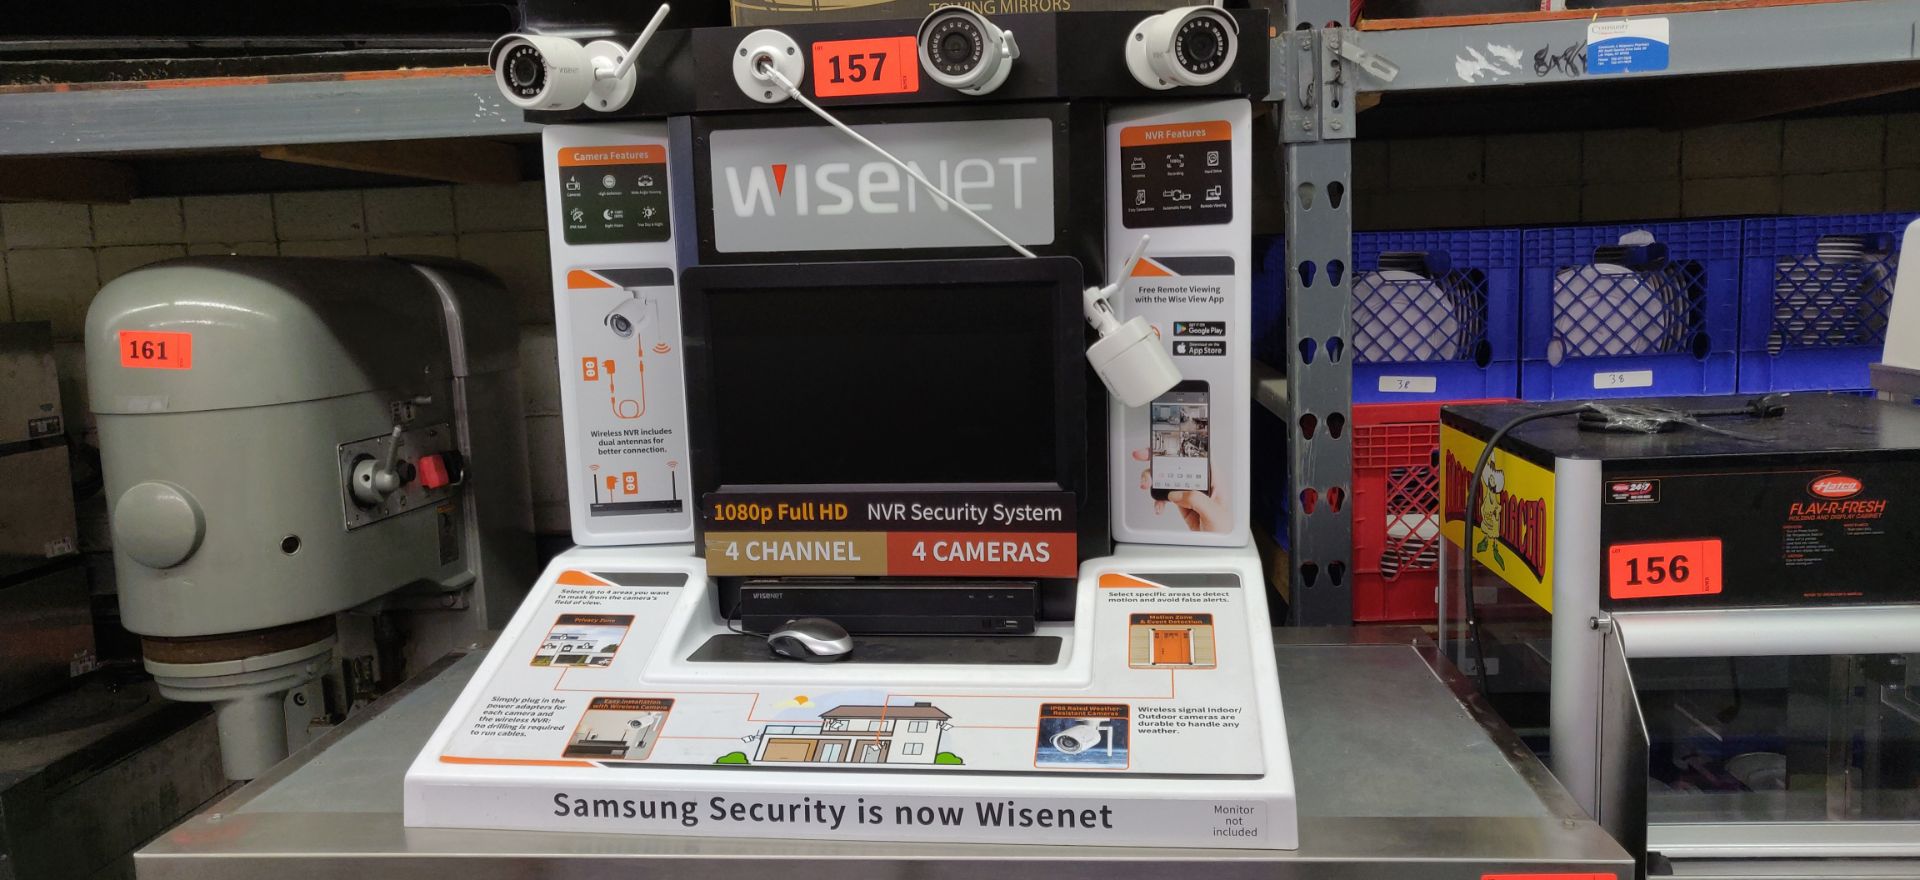 WISENET NVR SECURITY SYSTEM STORE DISPLAY UNIT